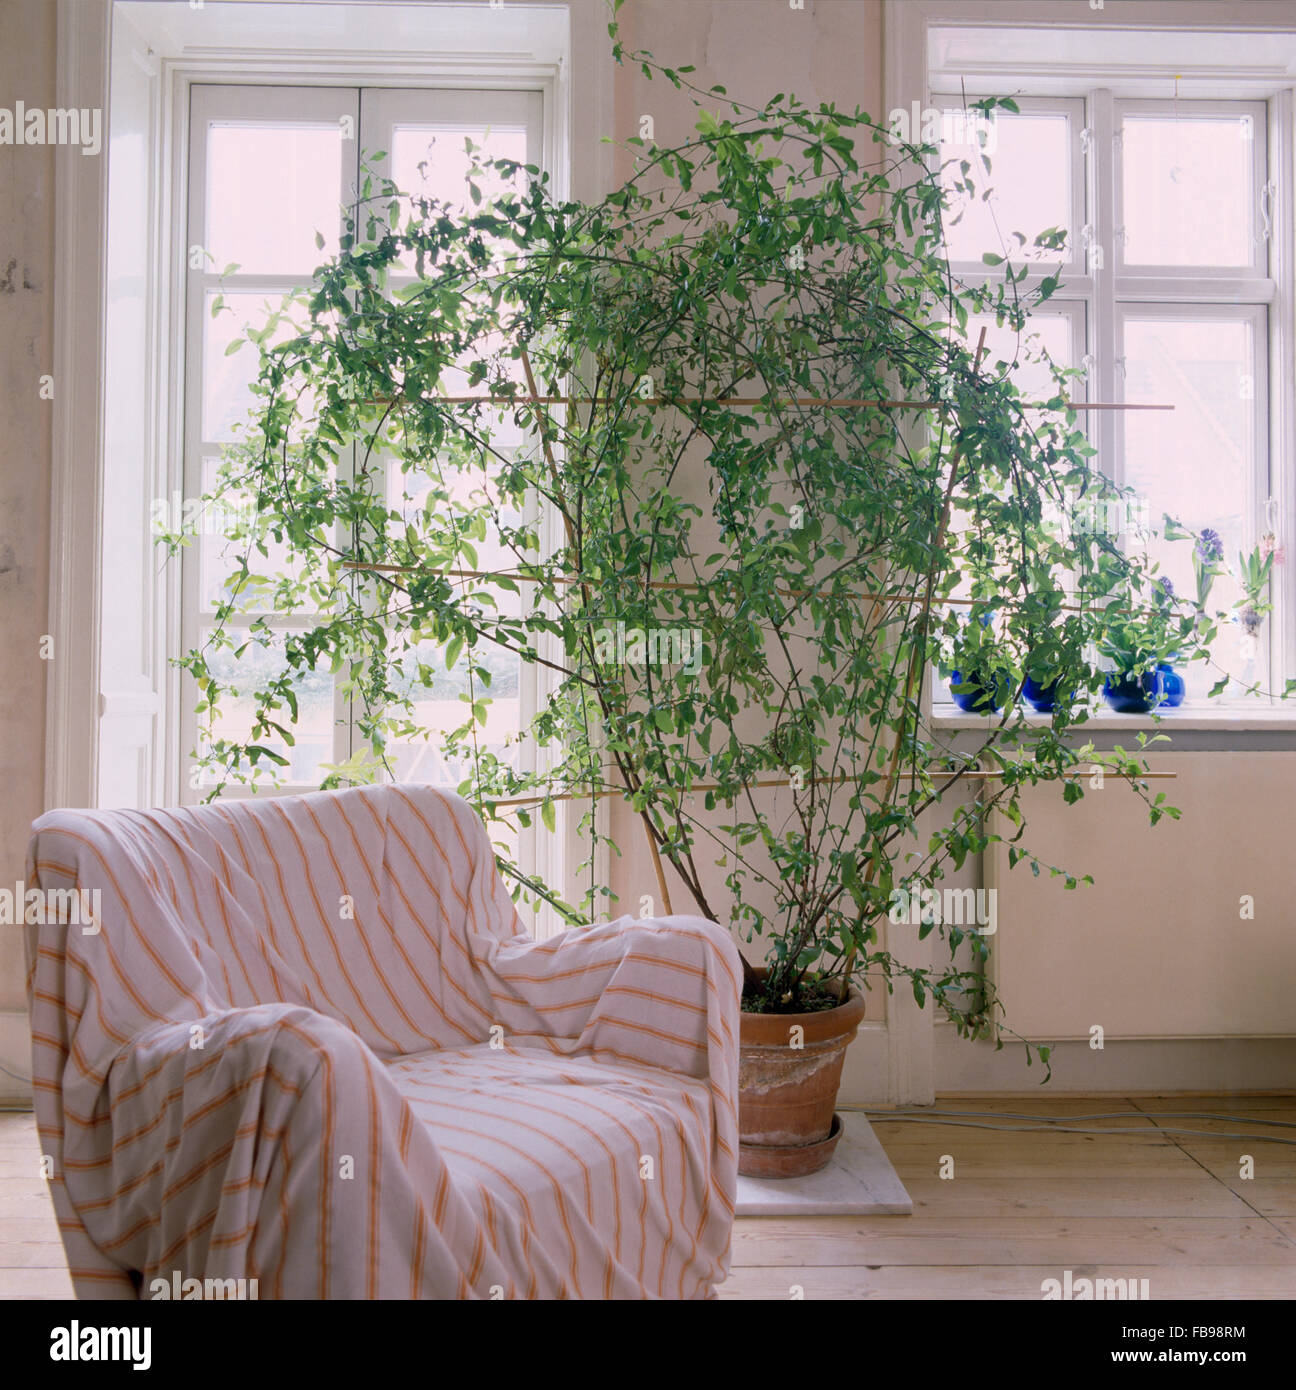 Striped throw on armchair in Danish apartment with a tall green plant in a pot in front of the windows Stock Photo